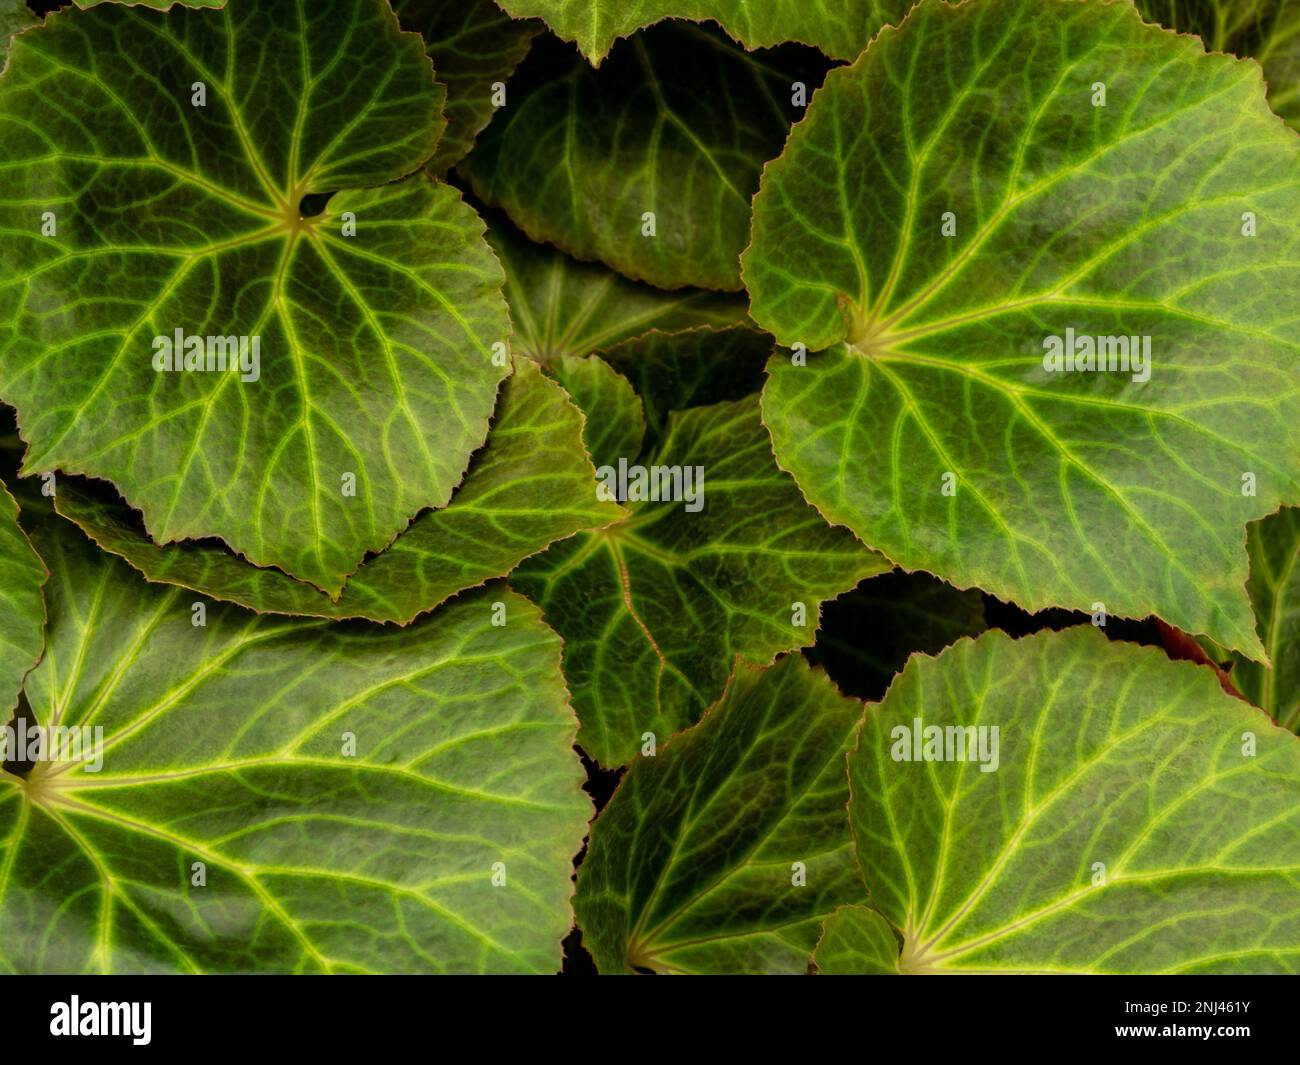 Full frame texture of Begonia leaves as nature background Stock Photo